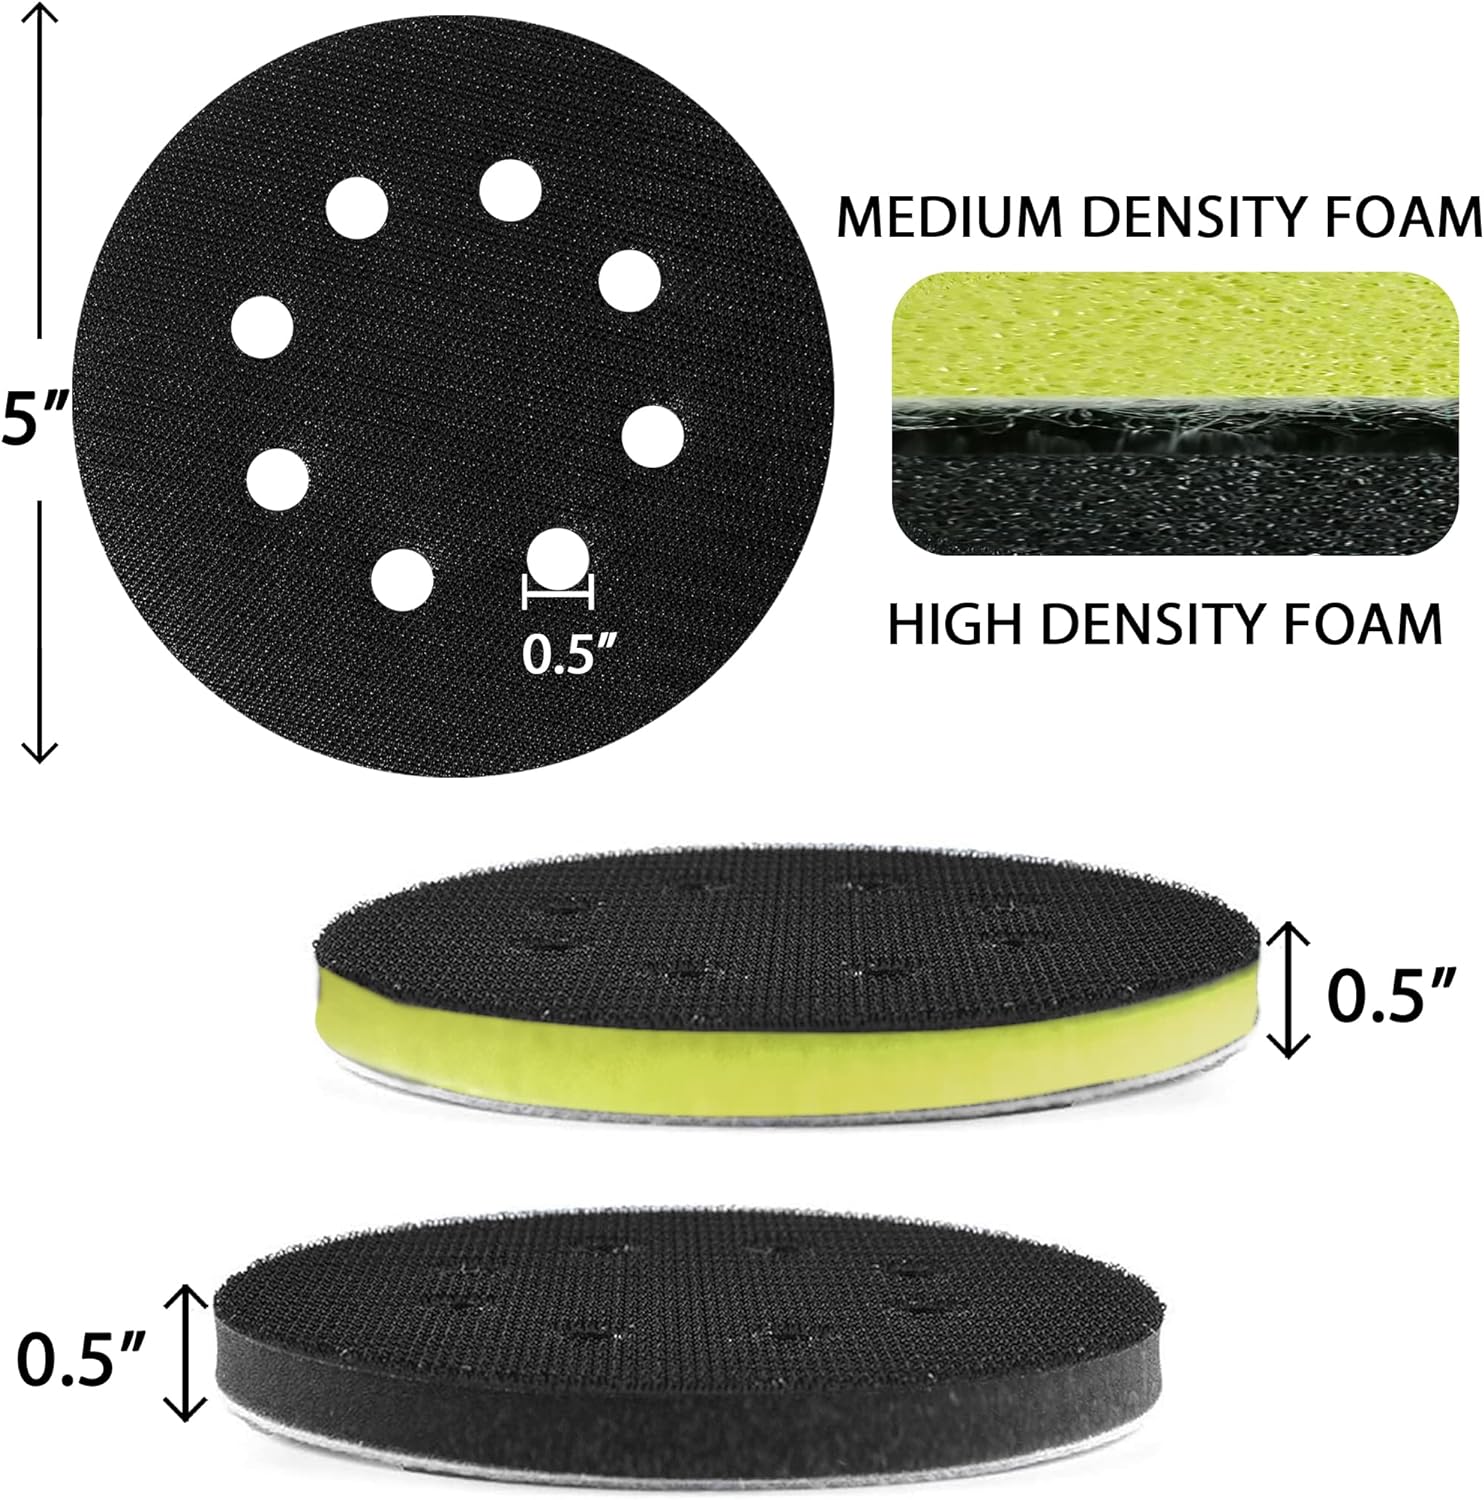 S&F STEAD & FAST 5 inch Orbital Sander Foam Pad 4 PCs, Interface Pad with 8 Holes, Foam Sanding Pads Hook and Loop, Soft Disc Pads with Cushion